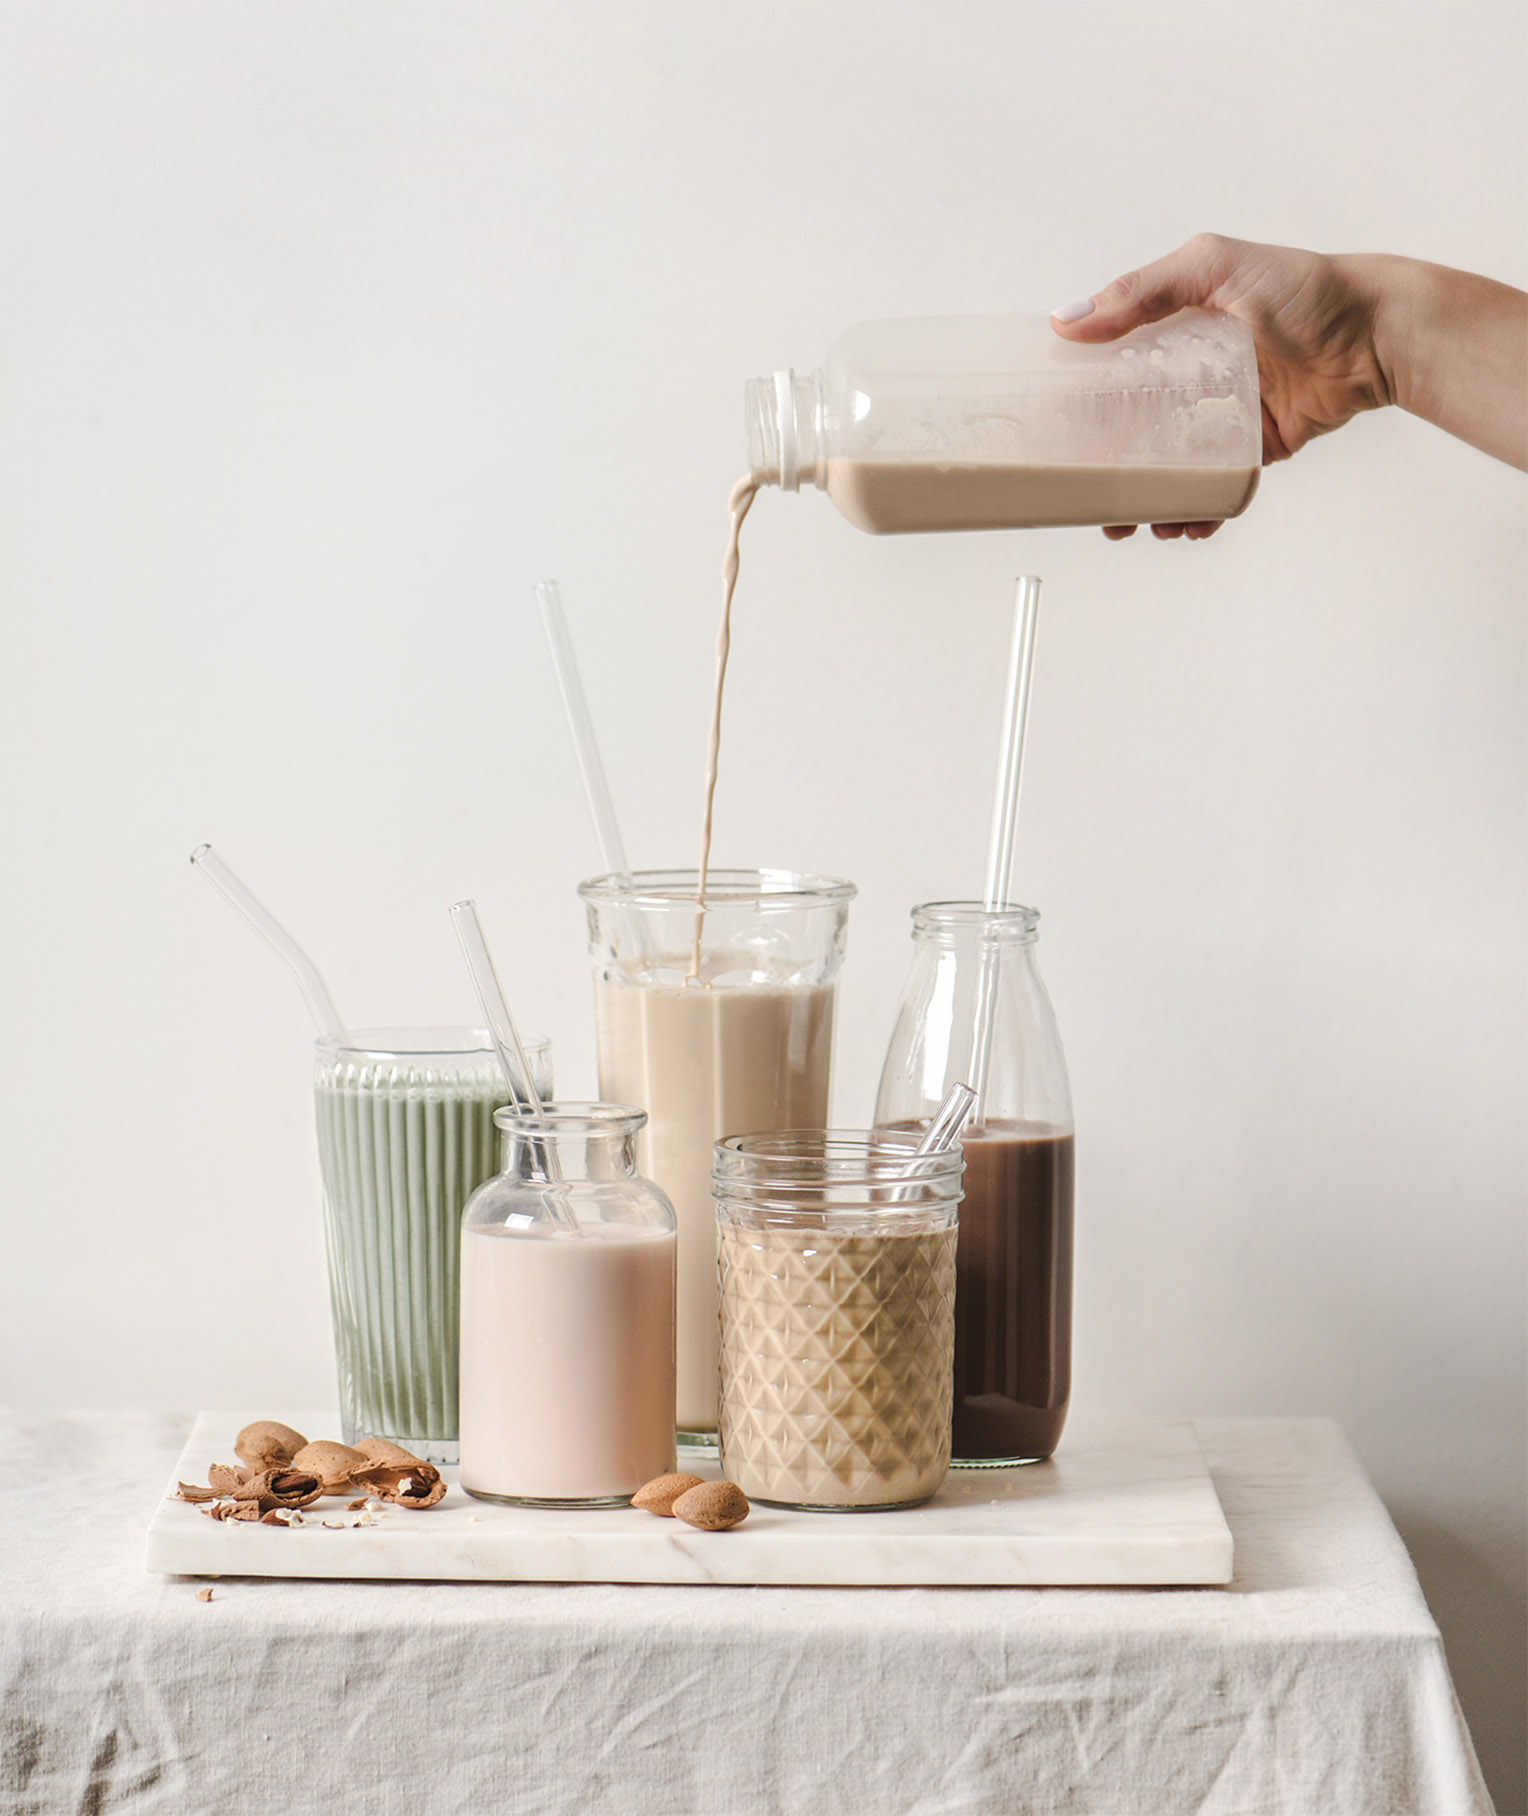 All About Nut Milk: Benefits, Tips, and Making Guide